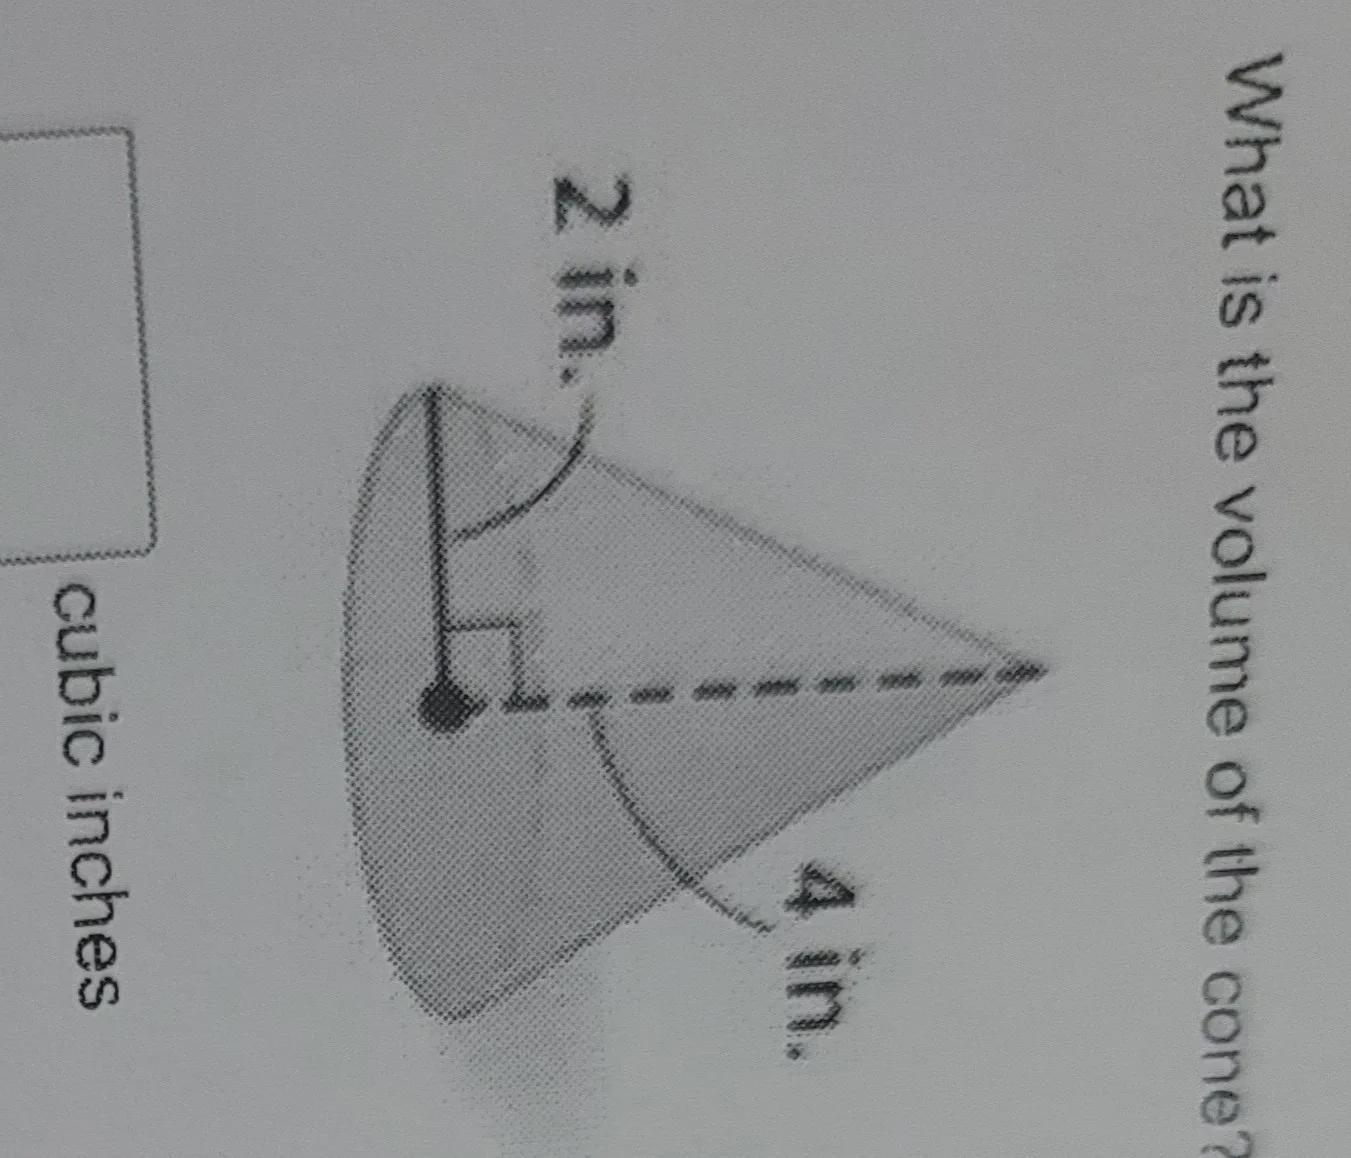 What Is The Volume Of The Cone? Use 3.14 For Pi And Round To The Nearest Hundredth 